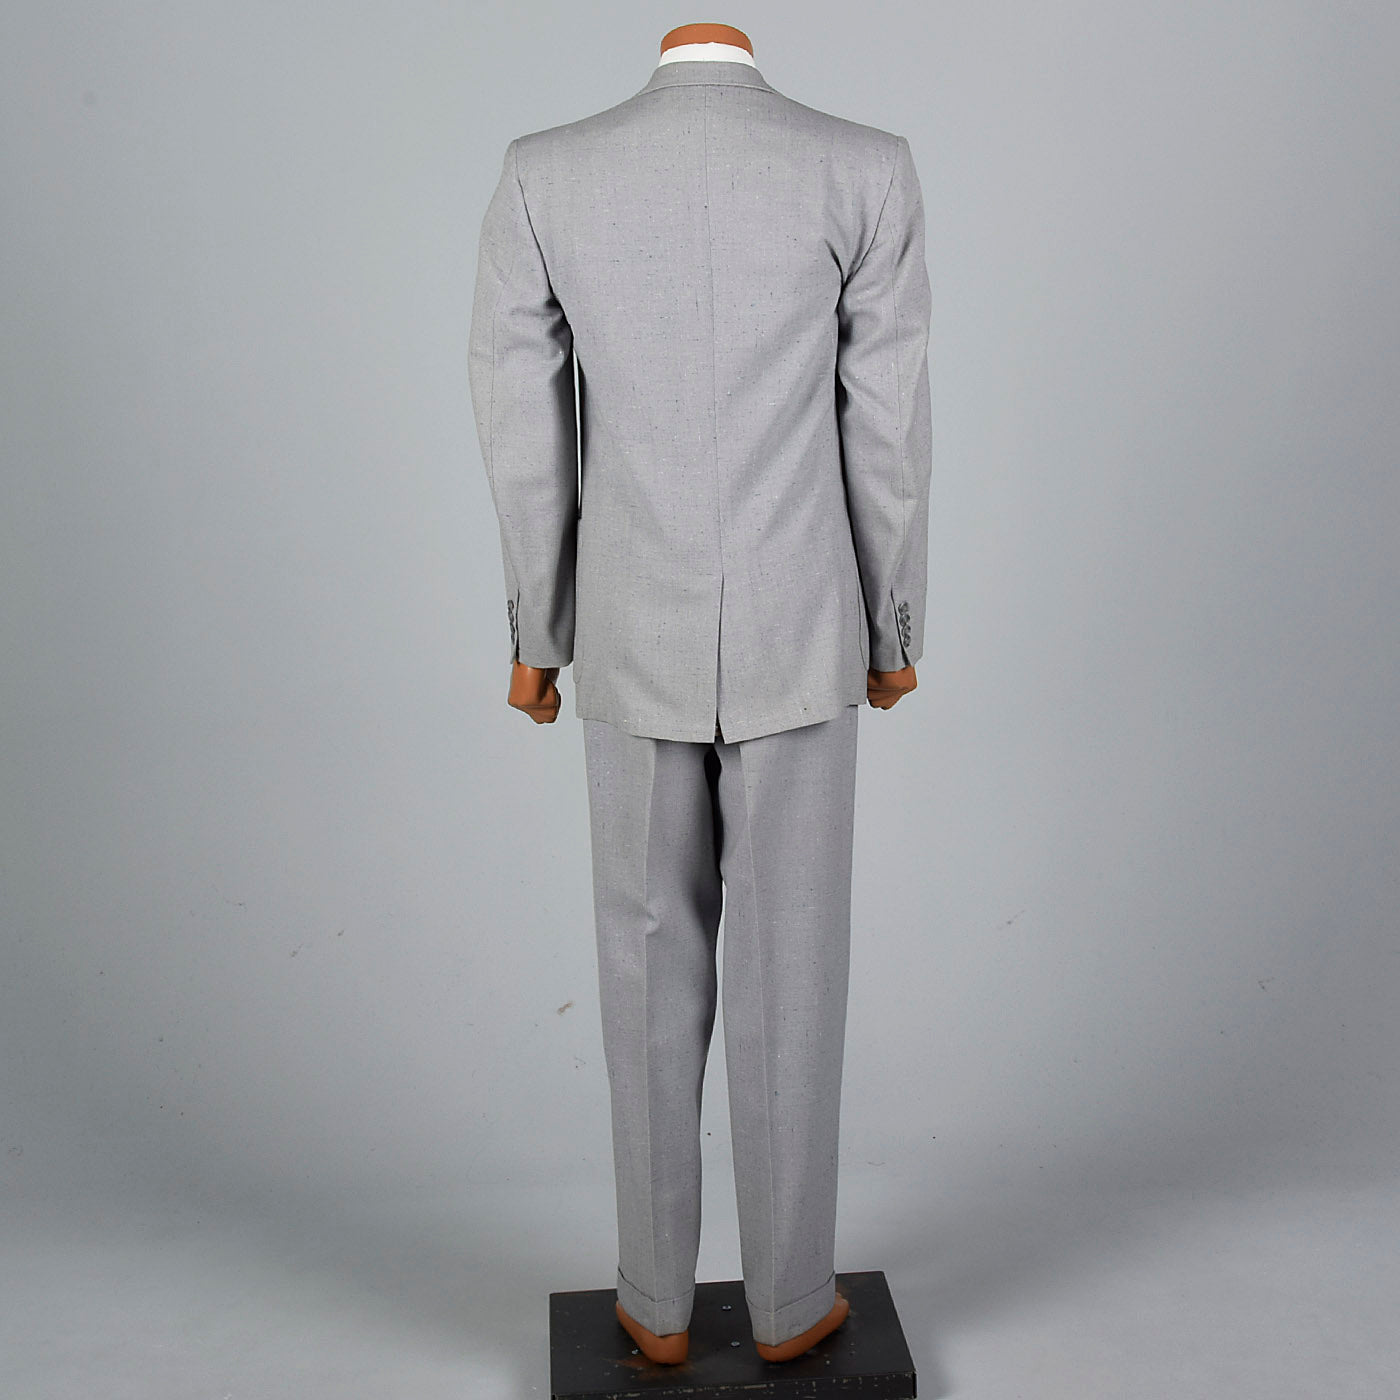 1950s Mens Two Piece Suit in Dove Gray with Blue & White Flecks